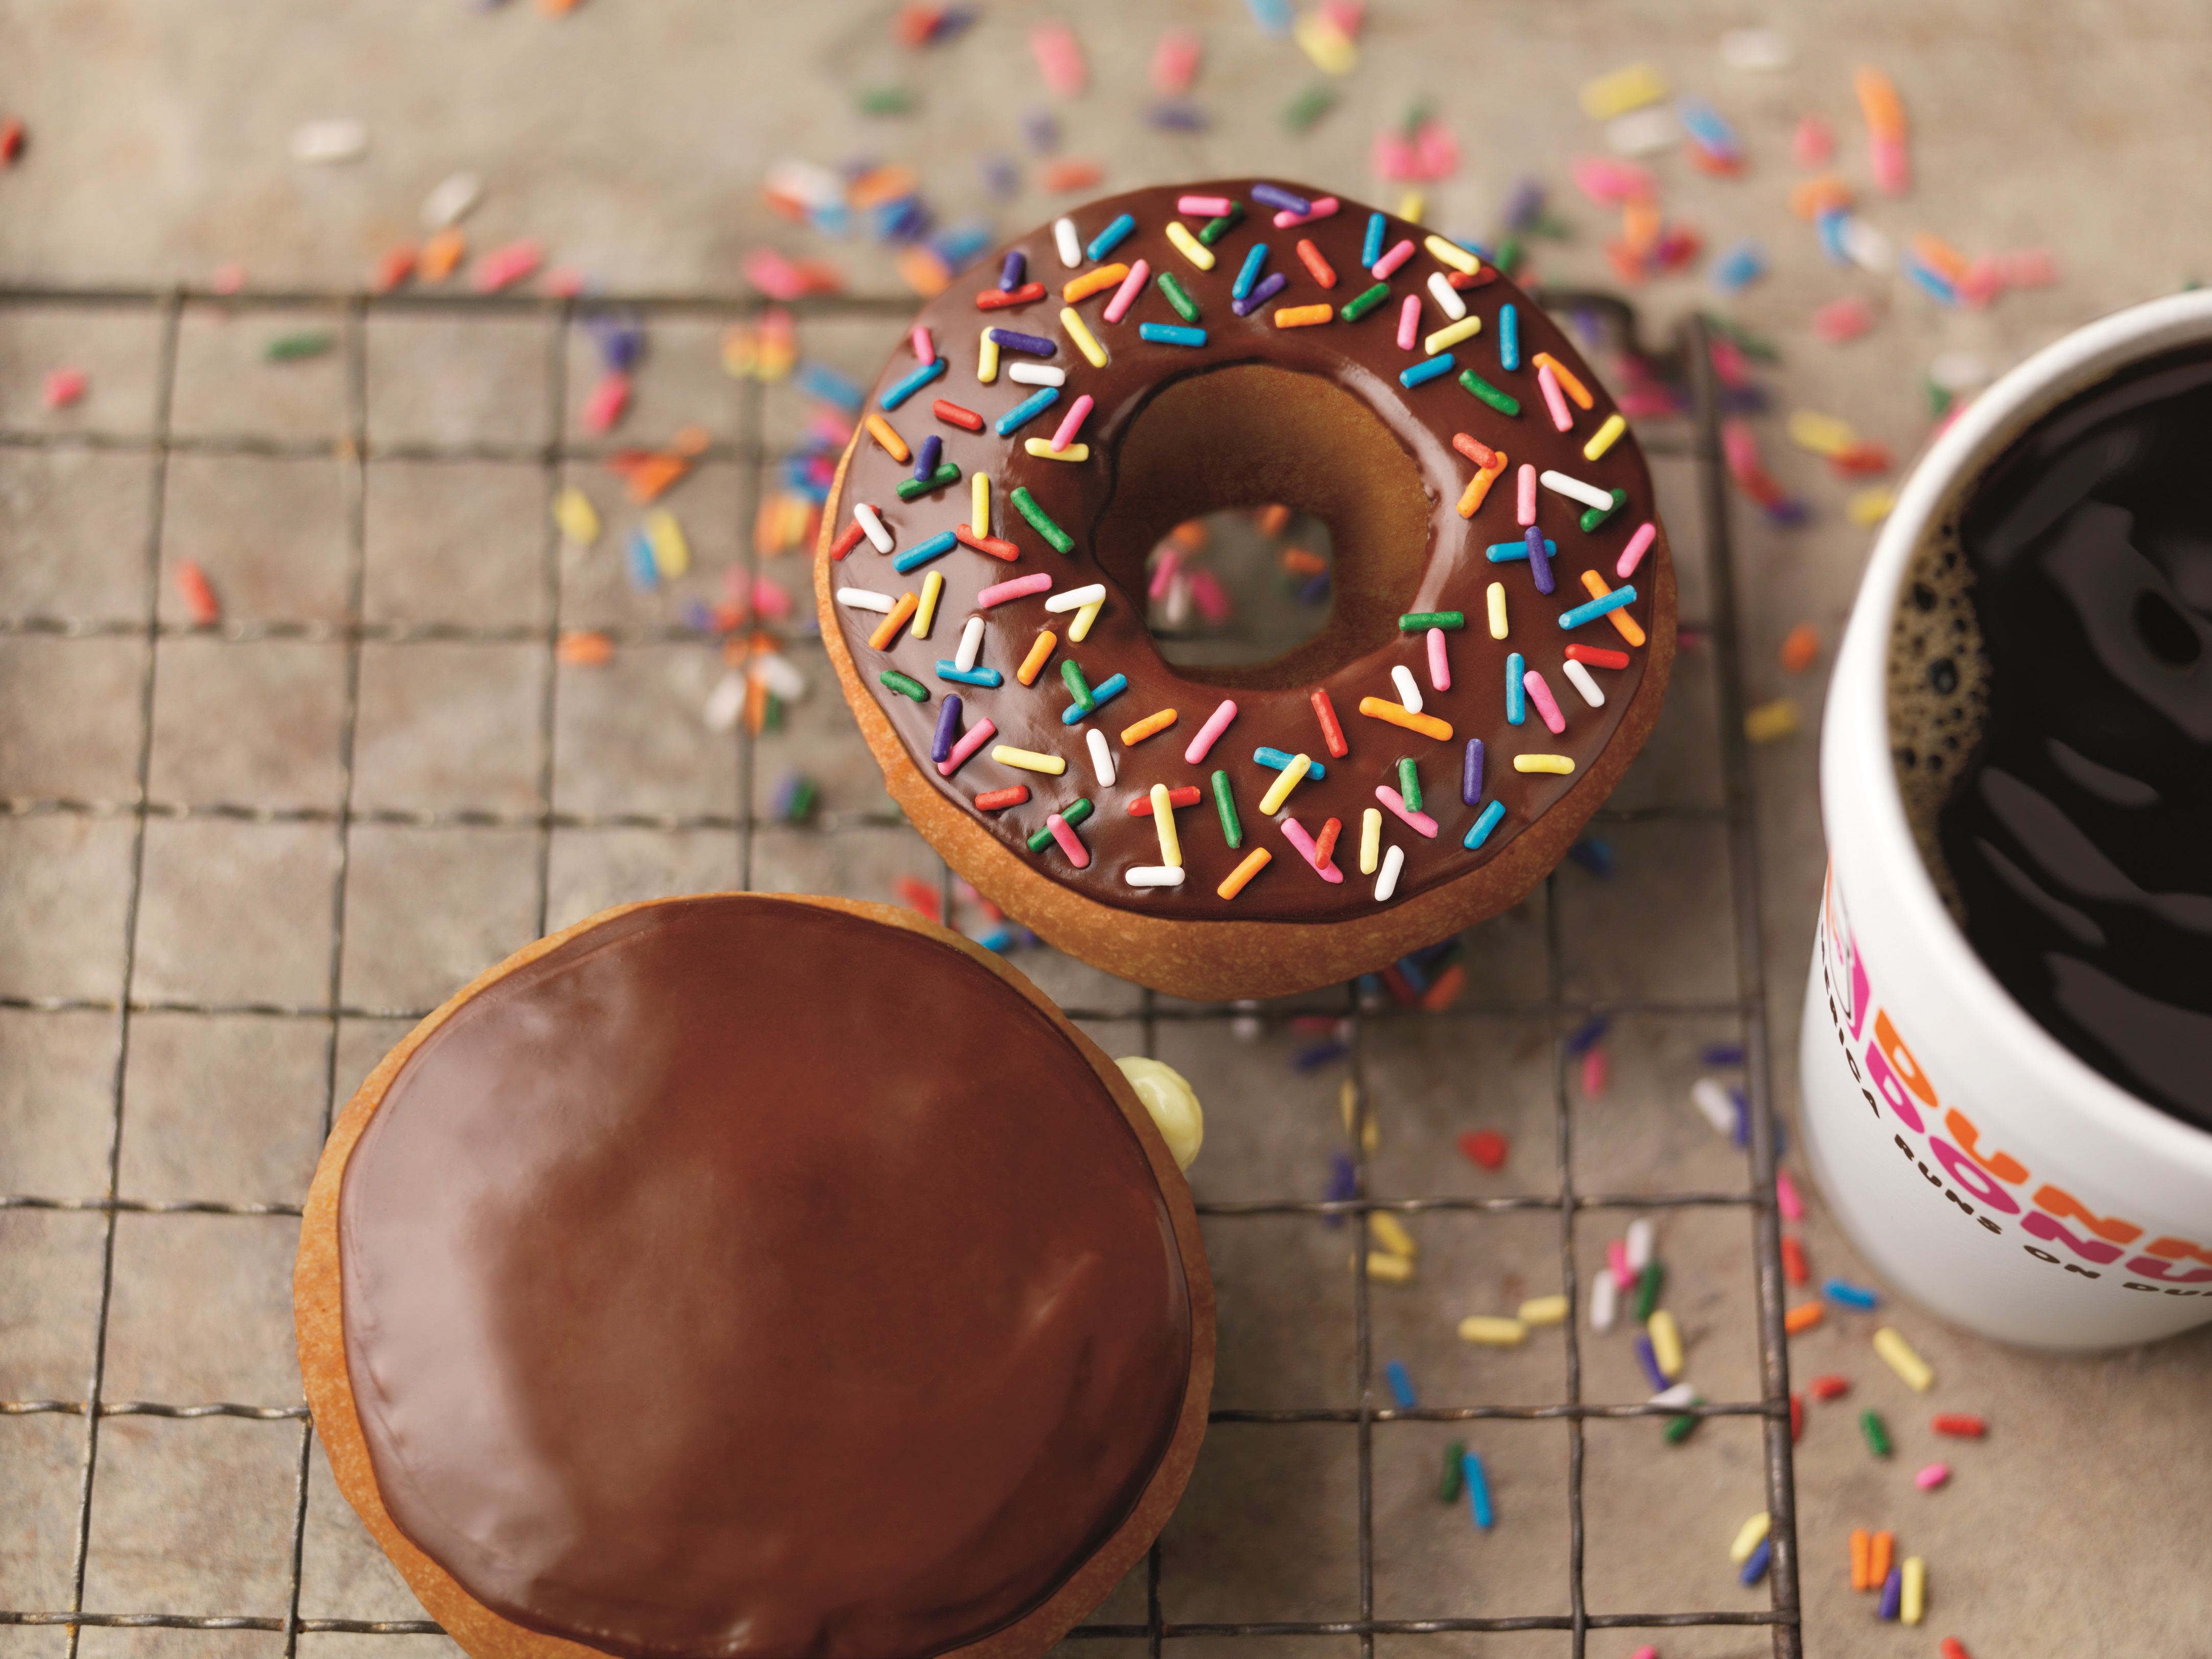 Dunkin' Donuts and Baskin Robbins Are Dumping Artificial Colors